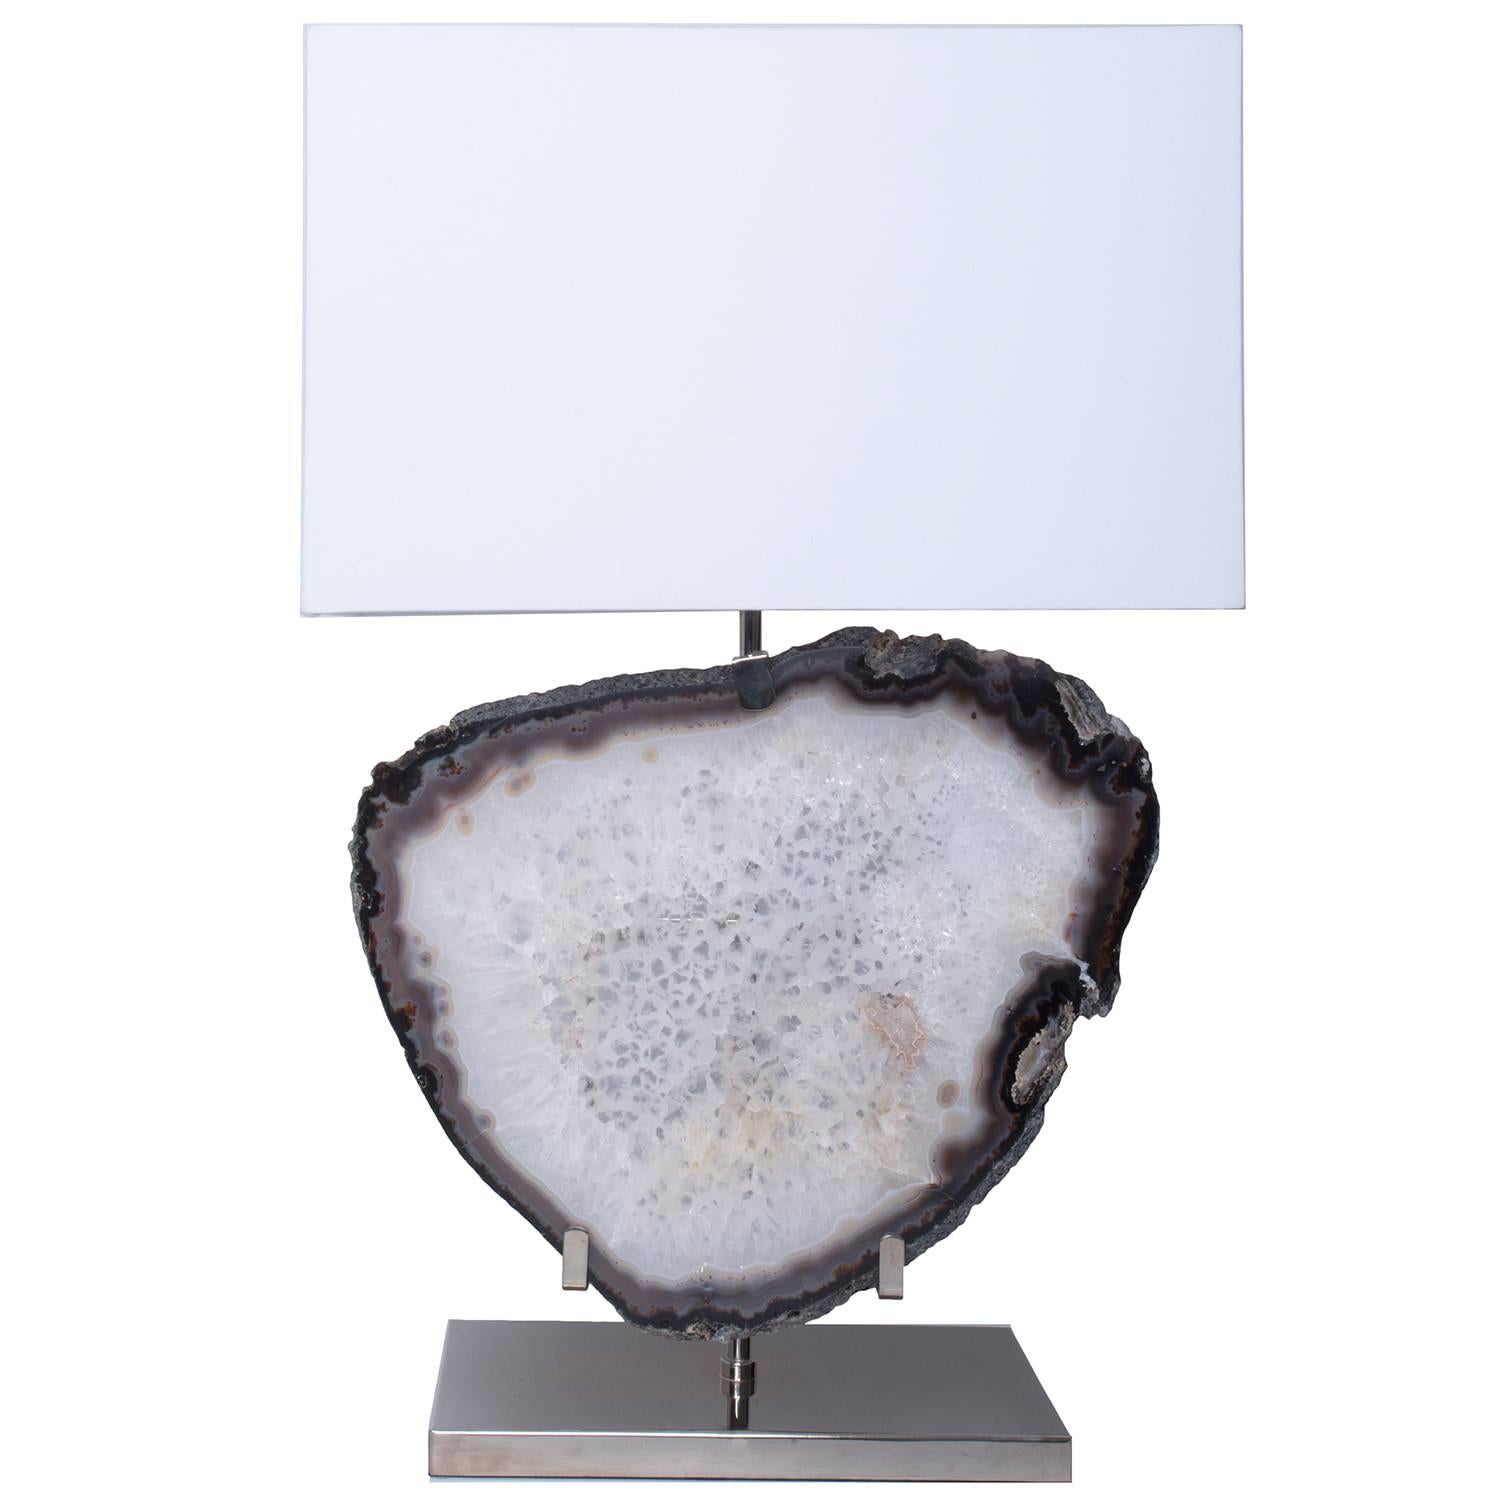 Table Lamp, White Agate, Brass with Nickel Finish Base, White Linen Shade